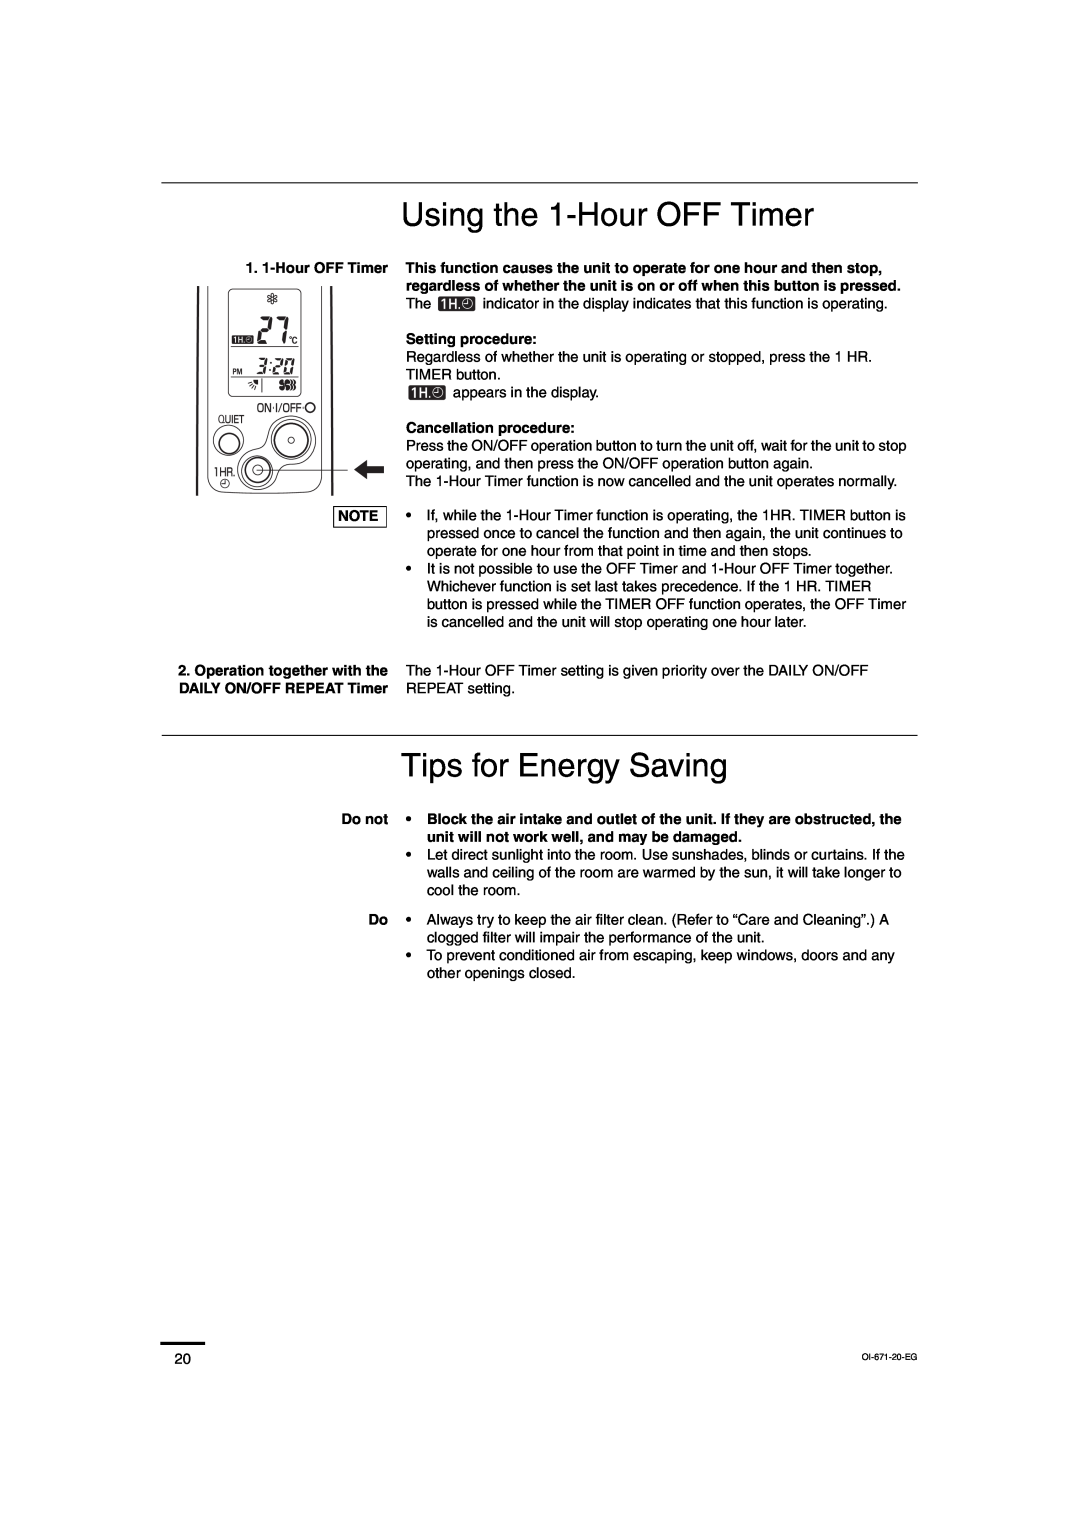 Sanyo SAP-CRV93EH, SAP-KRV123EH, SAP-KRV93EH, SAP-CRV123EH service manual Using the 1-HourOFF Timer, Tips for Energy Saving 